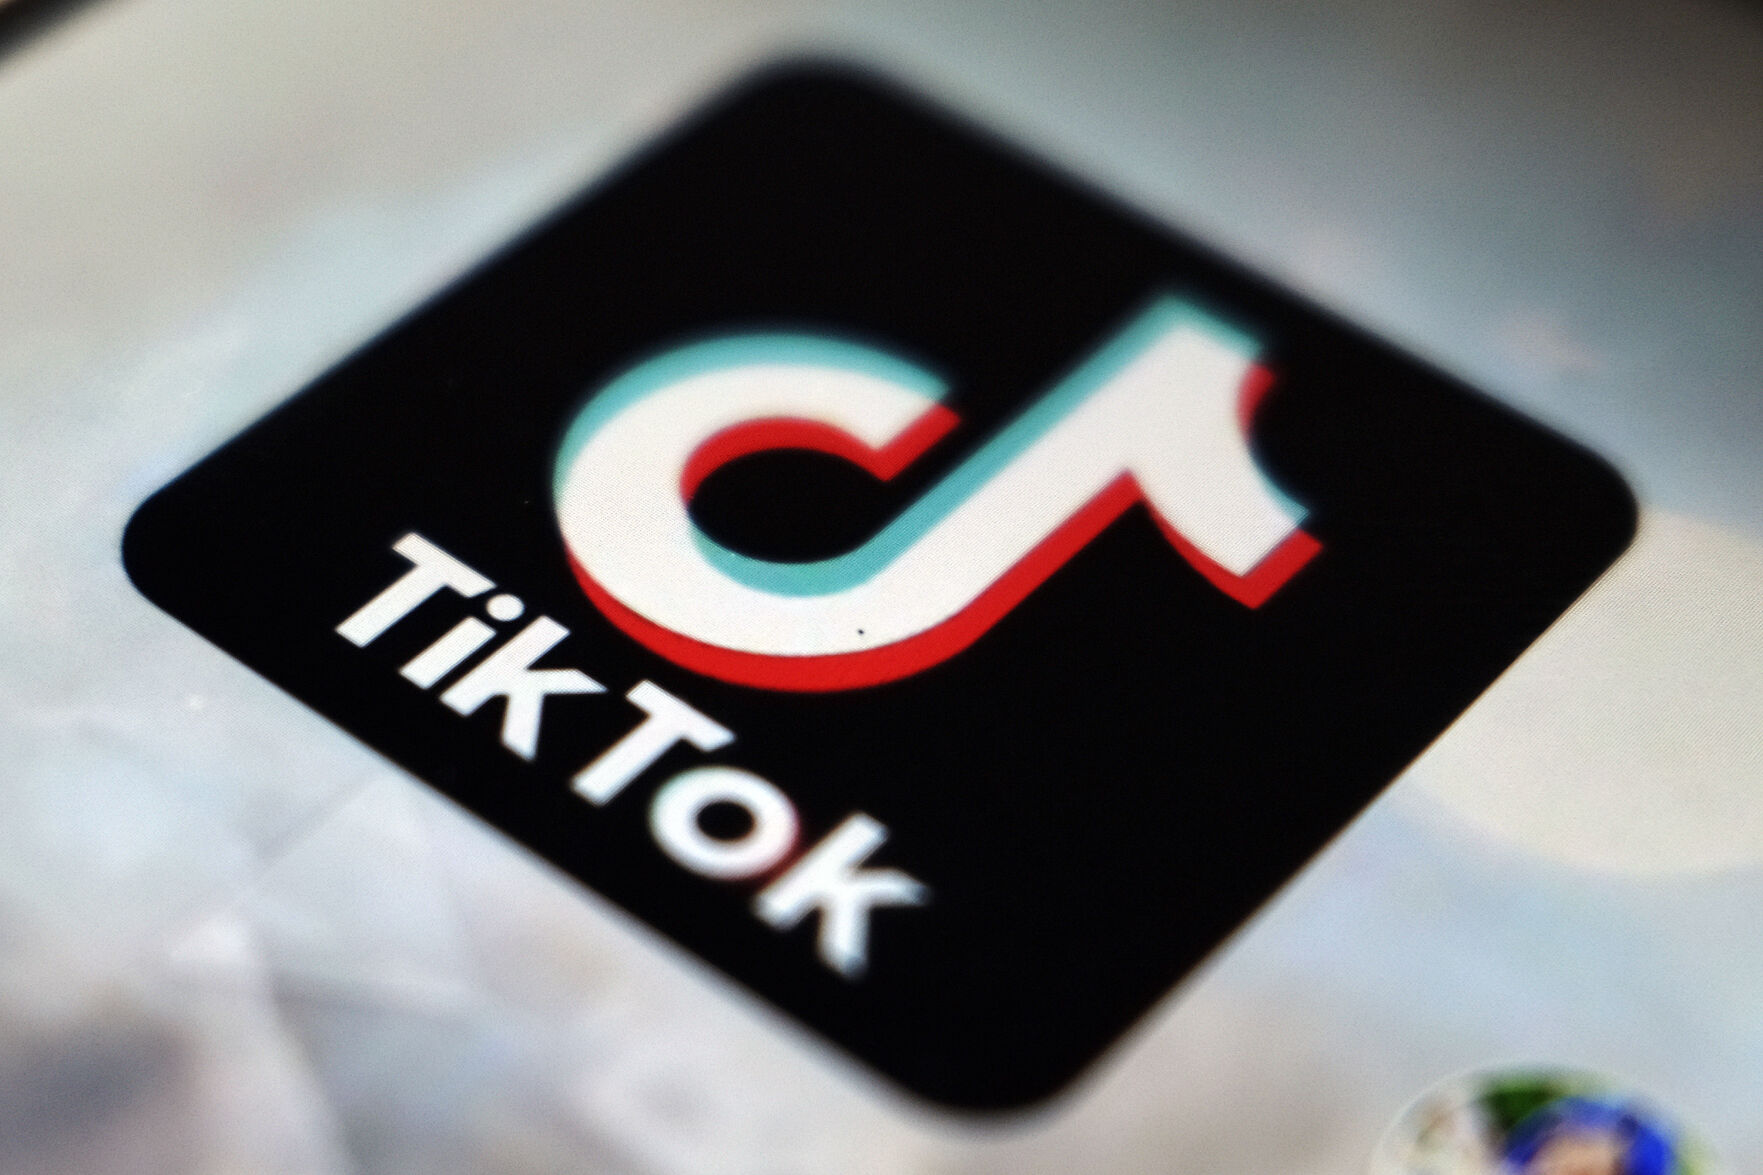 <p>FILE - A view of the TikTok app logo, in Tokyo, Sept. 28, 2020.Britain’s privacy watchdog has hit TikTok with a multimillion-dollar penalty for a slew of data protection breaches including misusing children’s data. The Information Commissioner’s Office said Tuesday, April 4, 2023, that it issued a $15.9 milllion fine to the the short-video sharing app, which is wildly popular with young people. (AP Photo/Kiichiro Sato, File)</p>   PHOTO CREDIT: Kiichiro Sato 